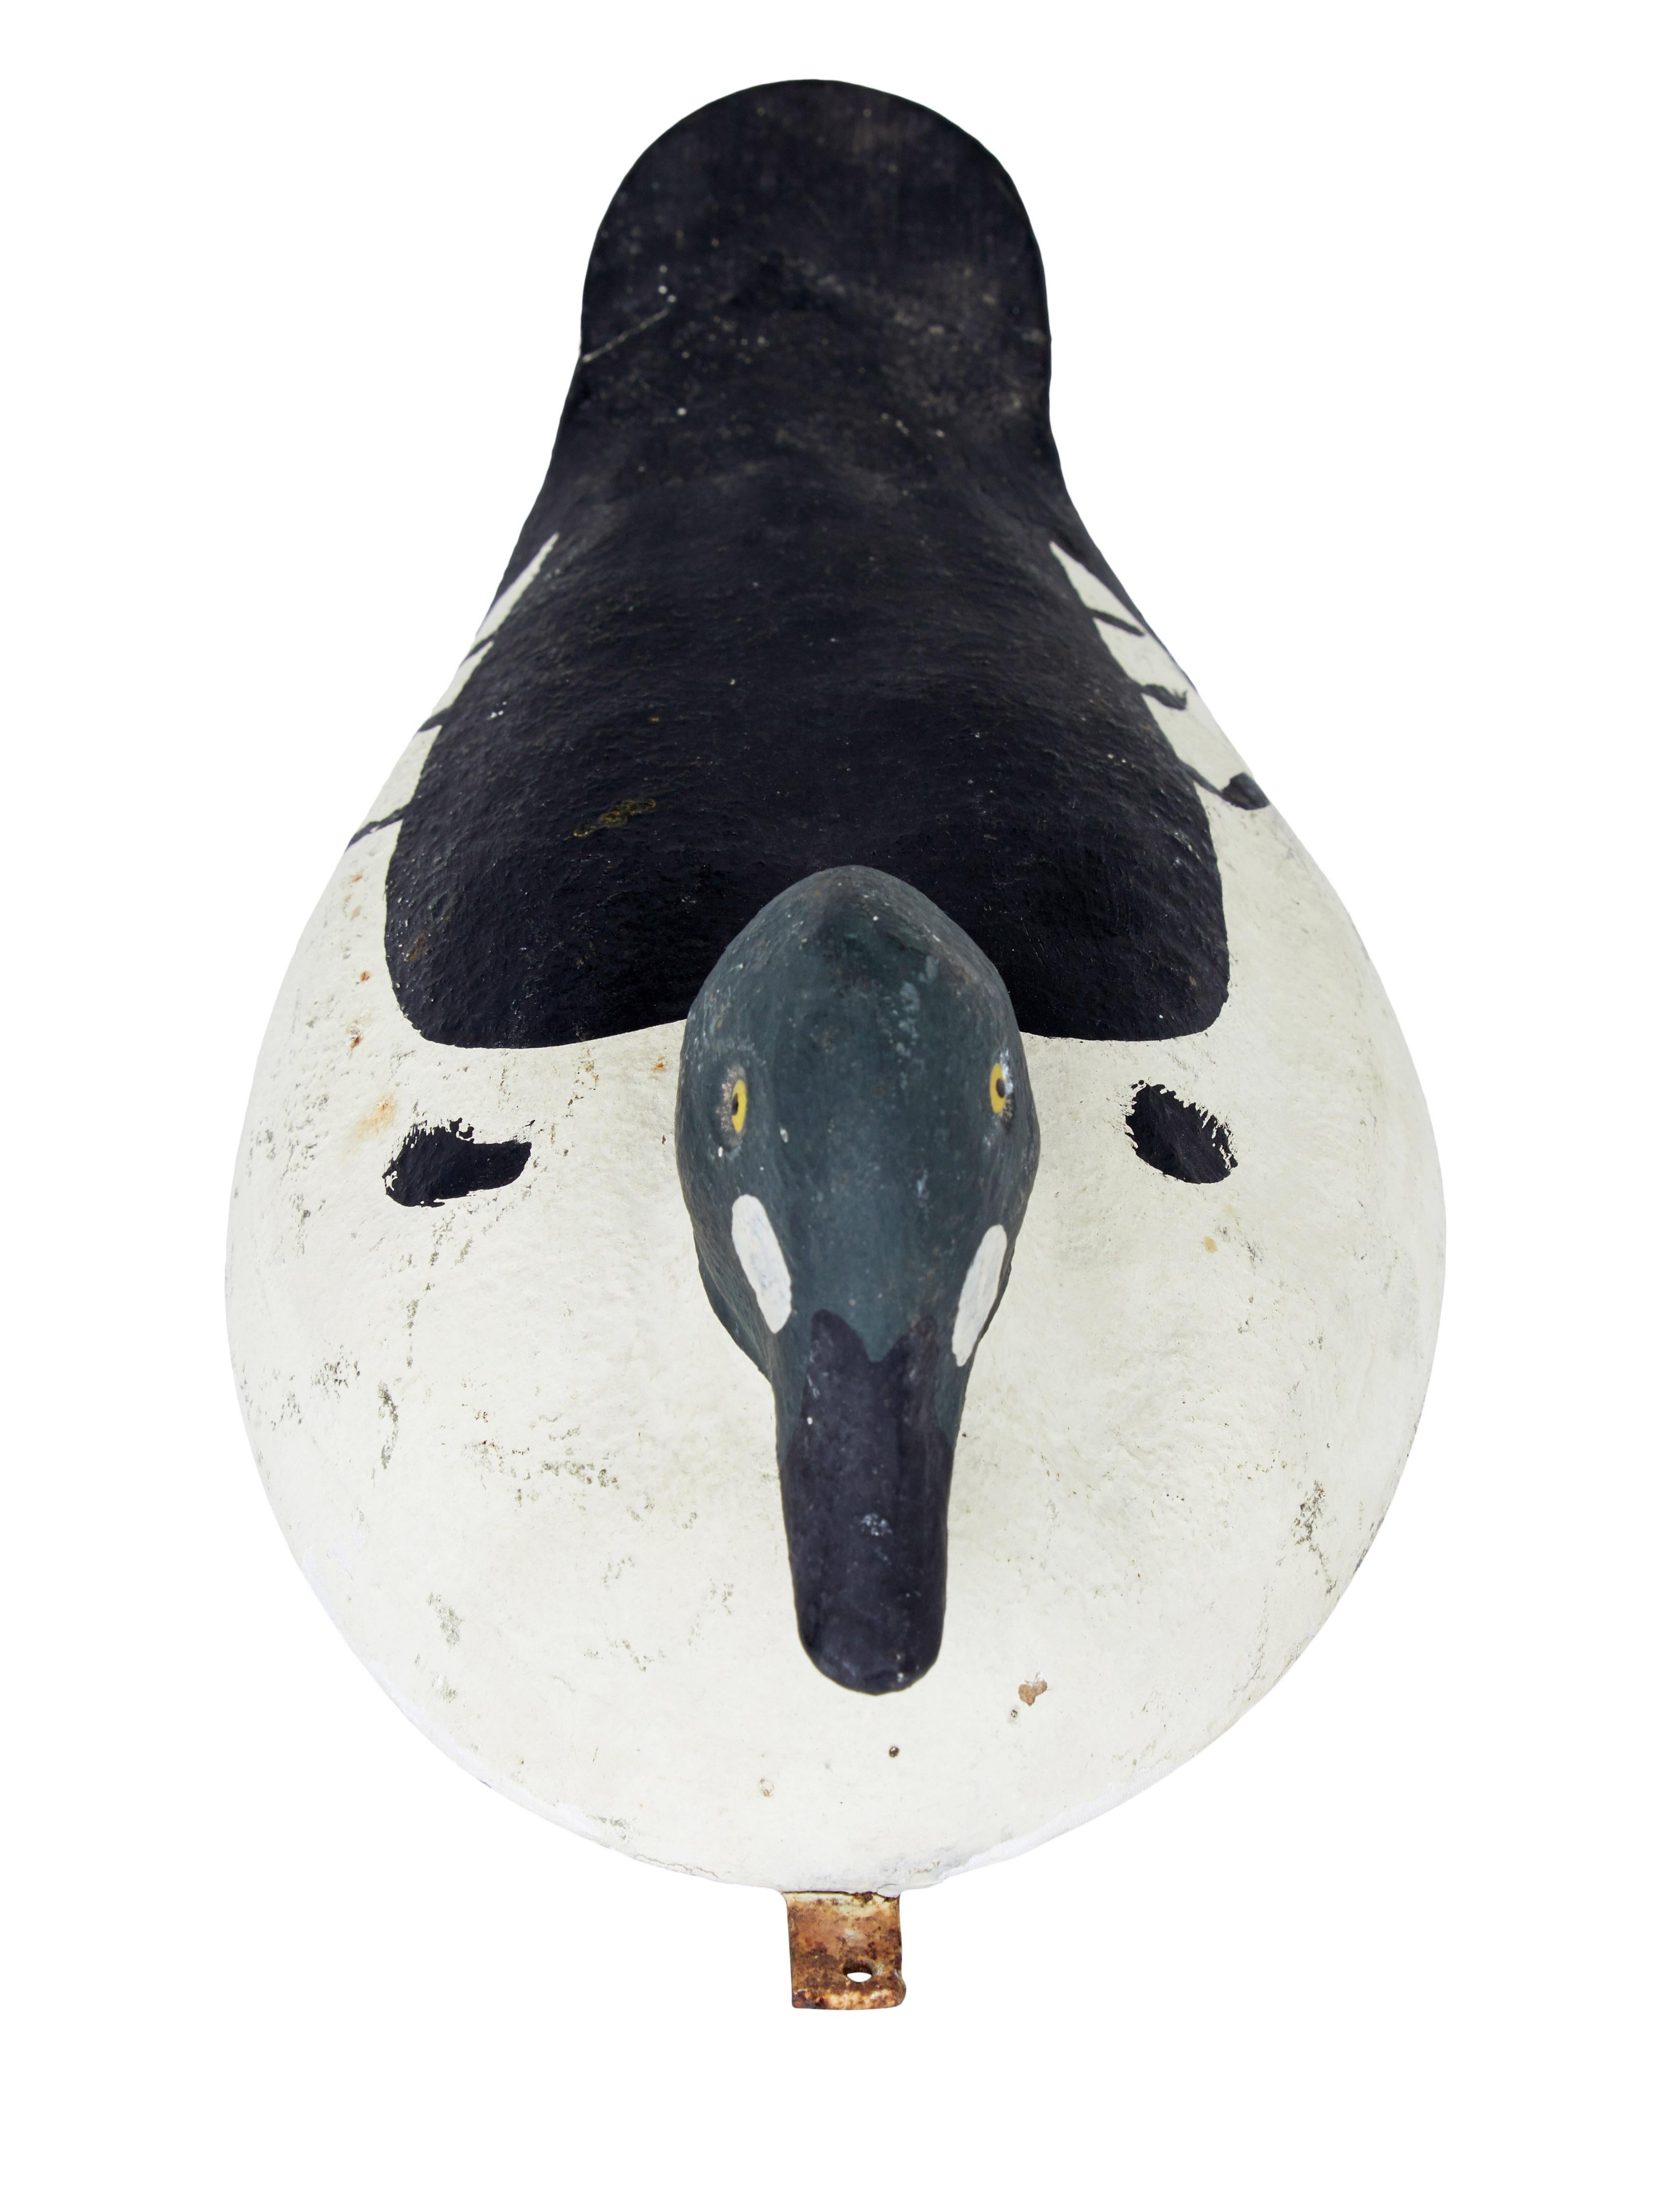 Early 20th century Swedish decoy duck by Ideal Vetter, circa 1920.

Hand painted decoy float with patent stamp of Ideal Vetter on the underside.

Good condition decorative item, minor losses to paintwork.